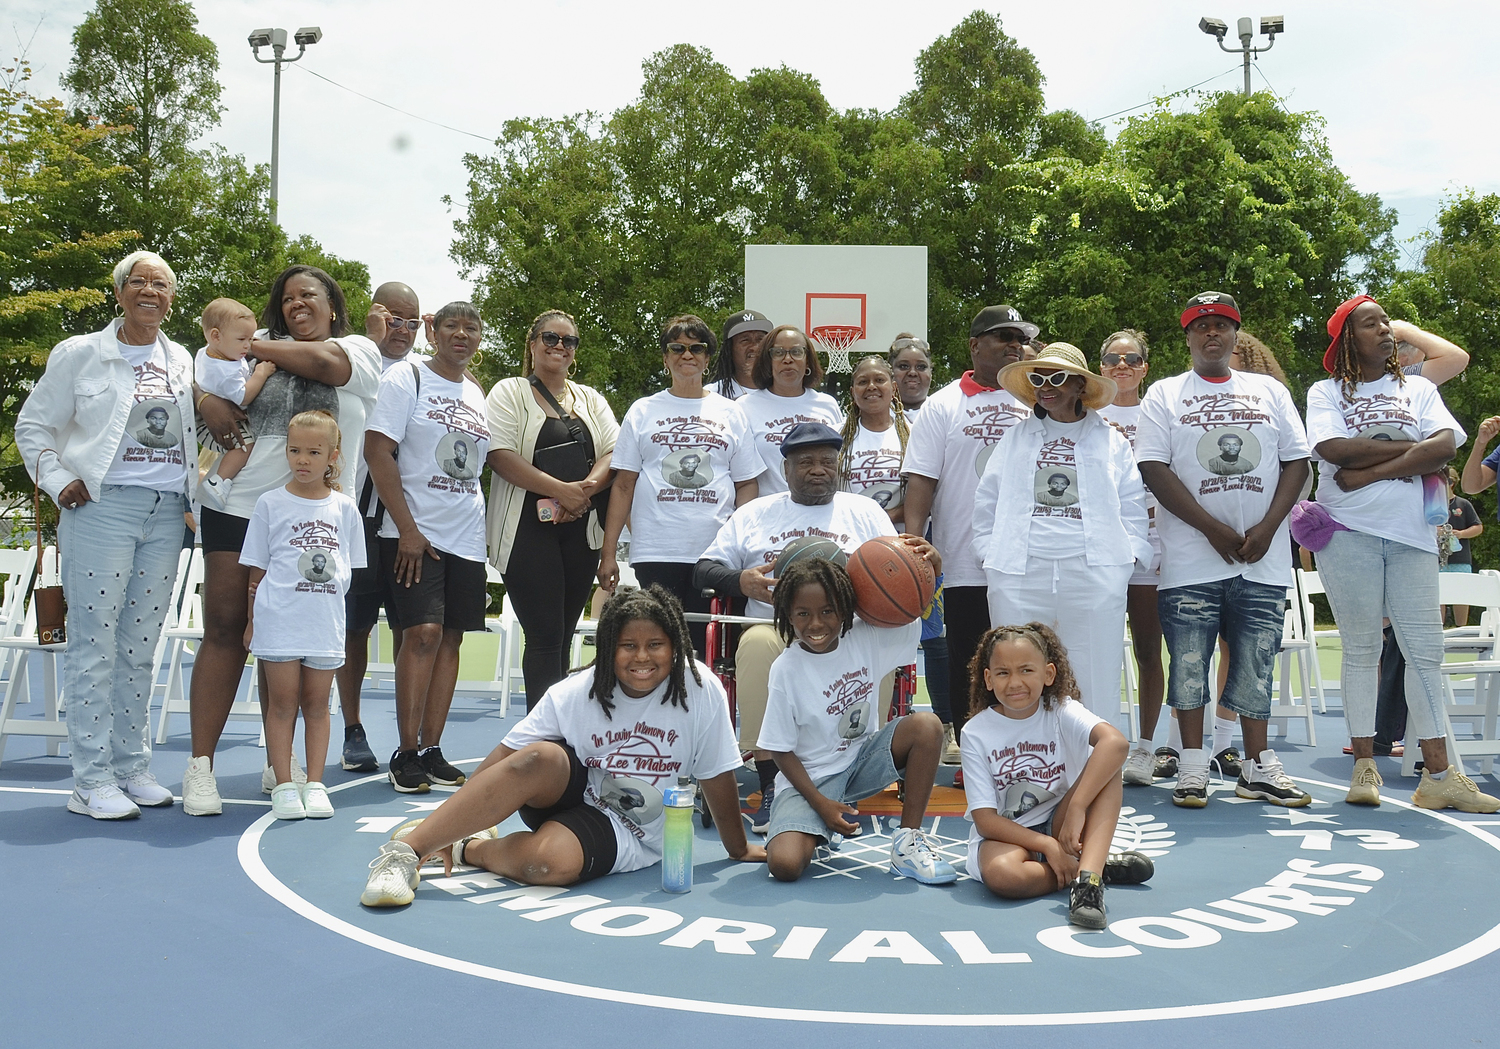 Roy Lee Mabery's father, Gilbert Mabery, center, was surrounded by family and friends during Saturday's ceremony to dedicate the new basketball courts in Herrick Park to the late student-athlete. KYRIL BROMLEY